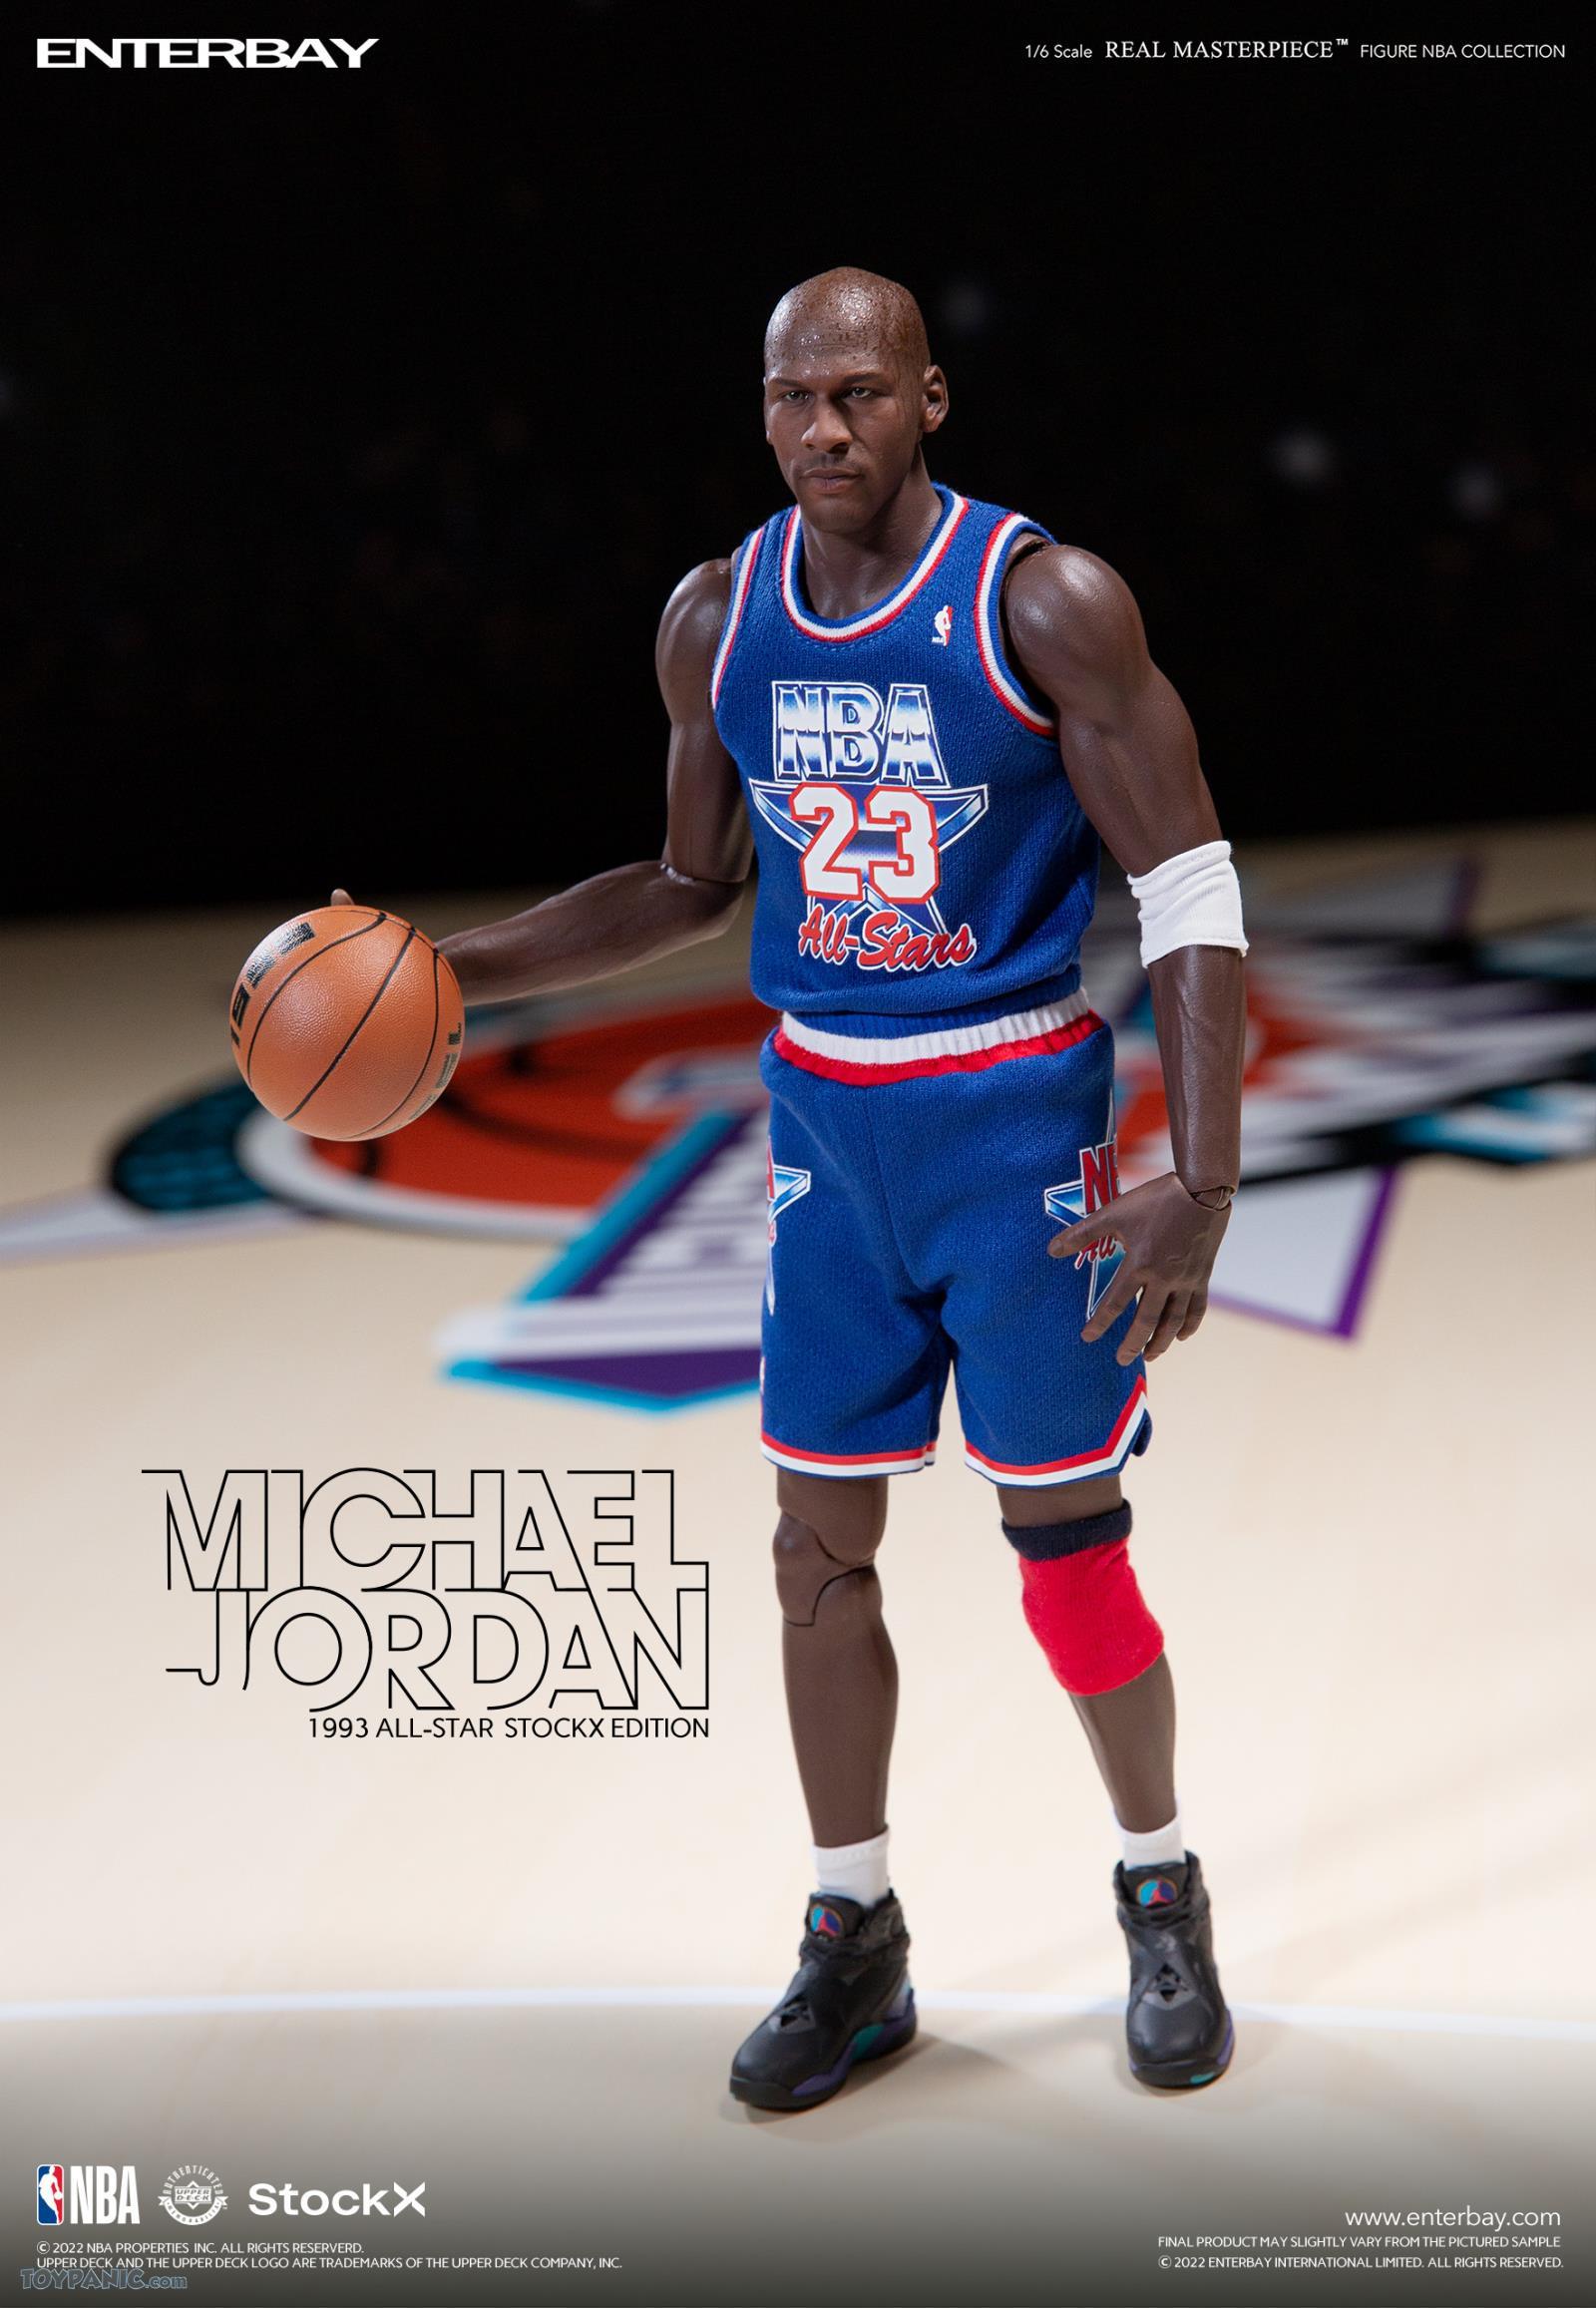 NEW PRODUCT: Enterbay - Real Masterpiece NBA Collection Michael Jordan All Star 1993 Edition 0026